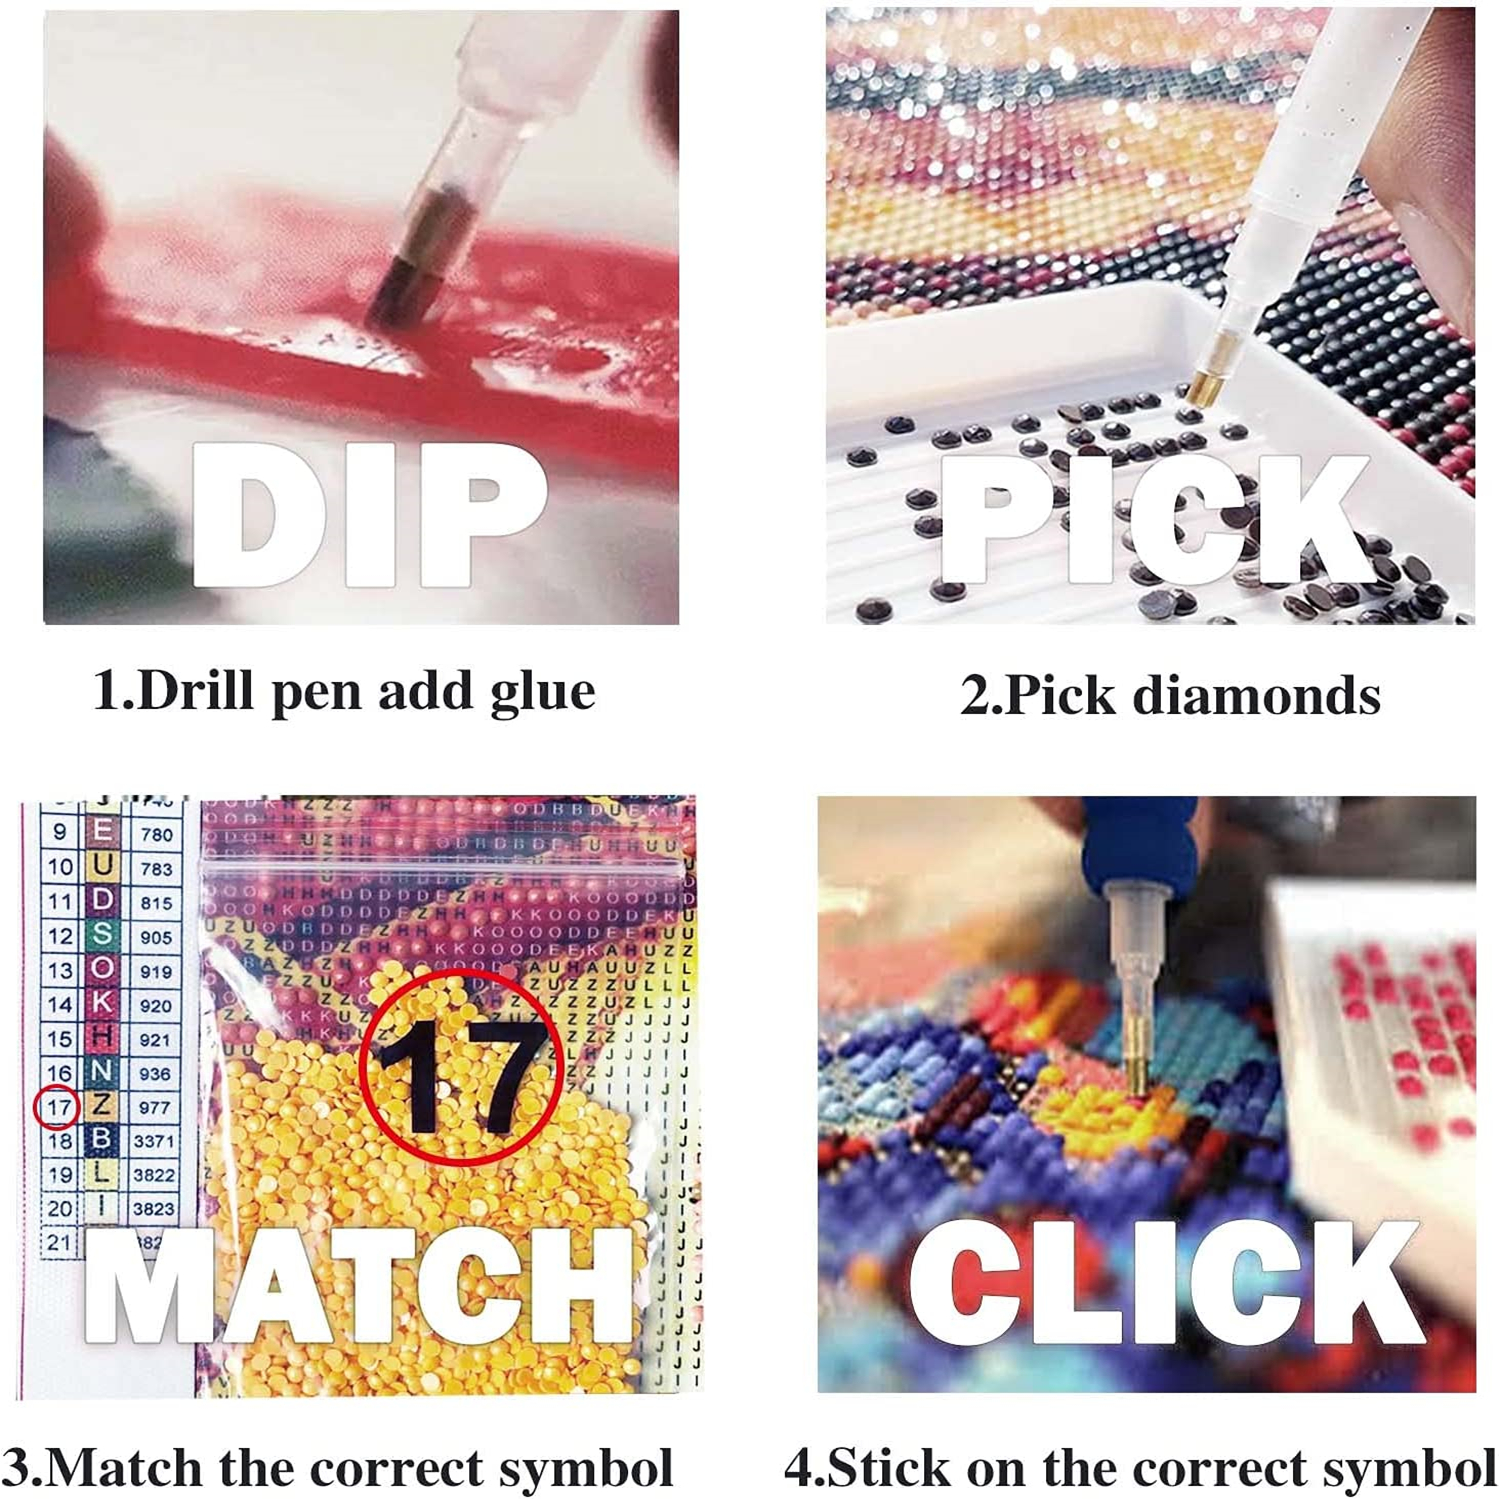 5D Diamond Painting Kits for Adults Kids, DIY Round Turtle Full Drill  Rhinestone Art Craft for Home Wall Decor - 15.7x11.8Inches 